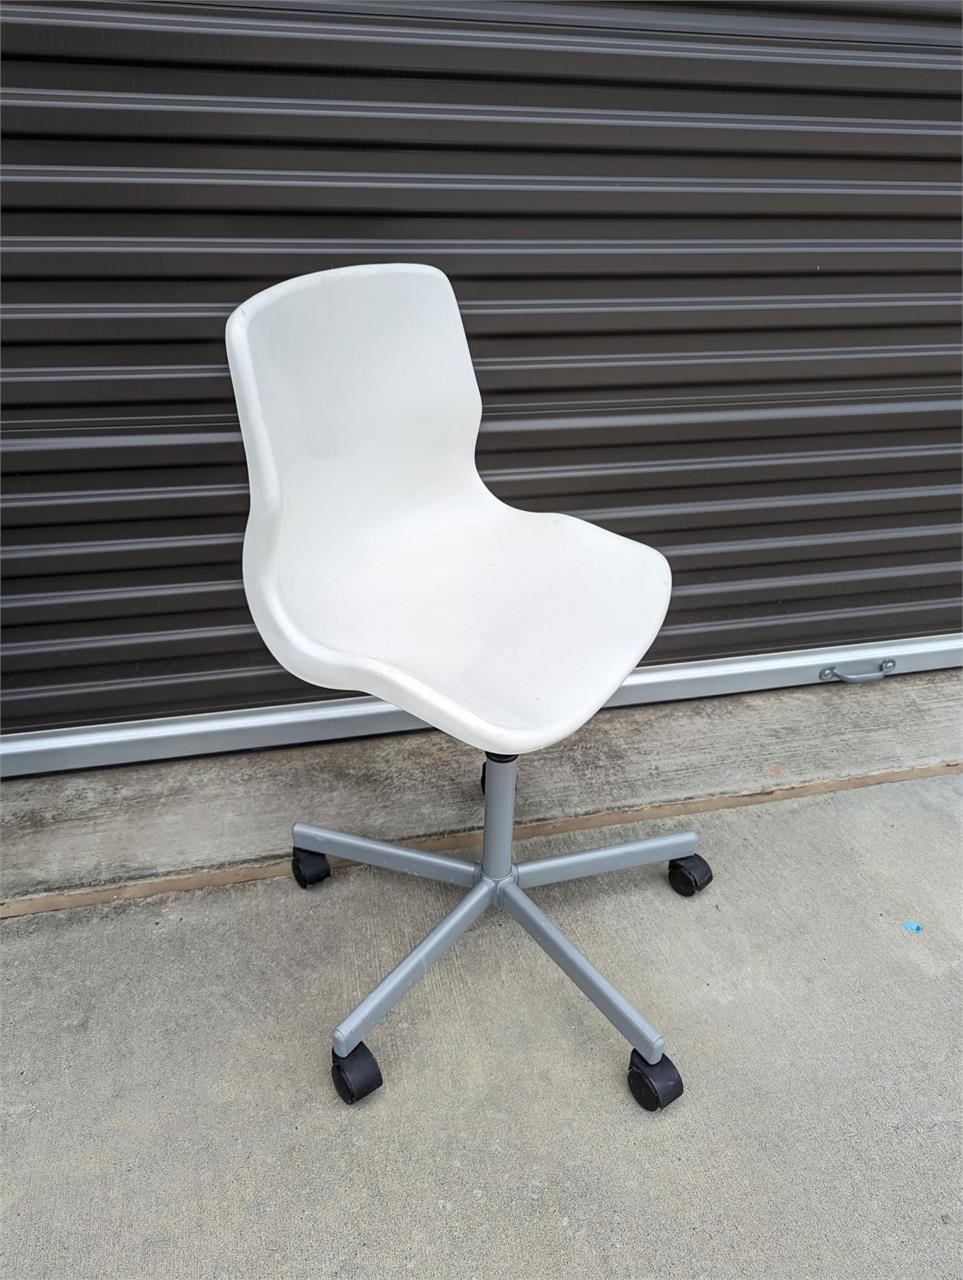 $89 Chic White Sculped Chair